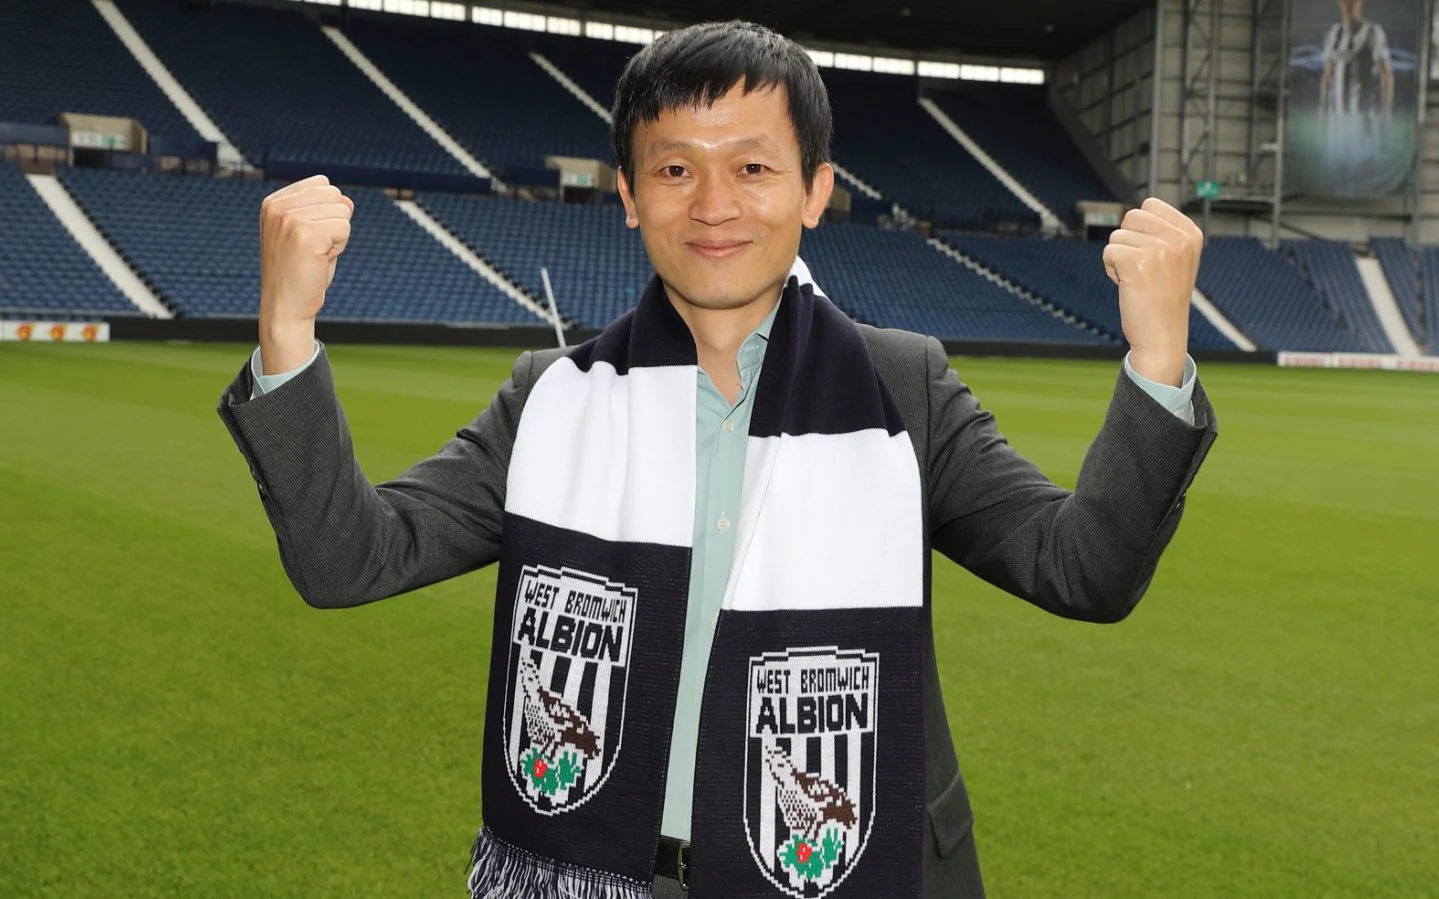 lai west brom albion